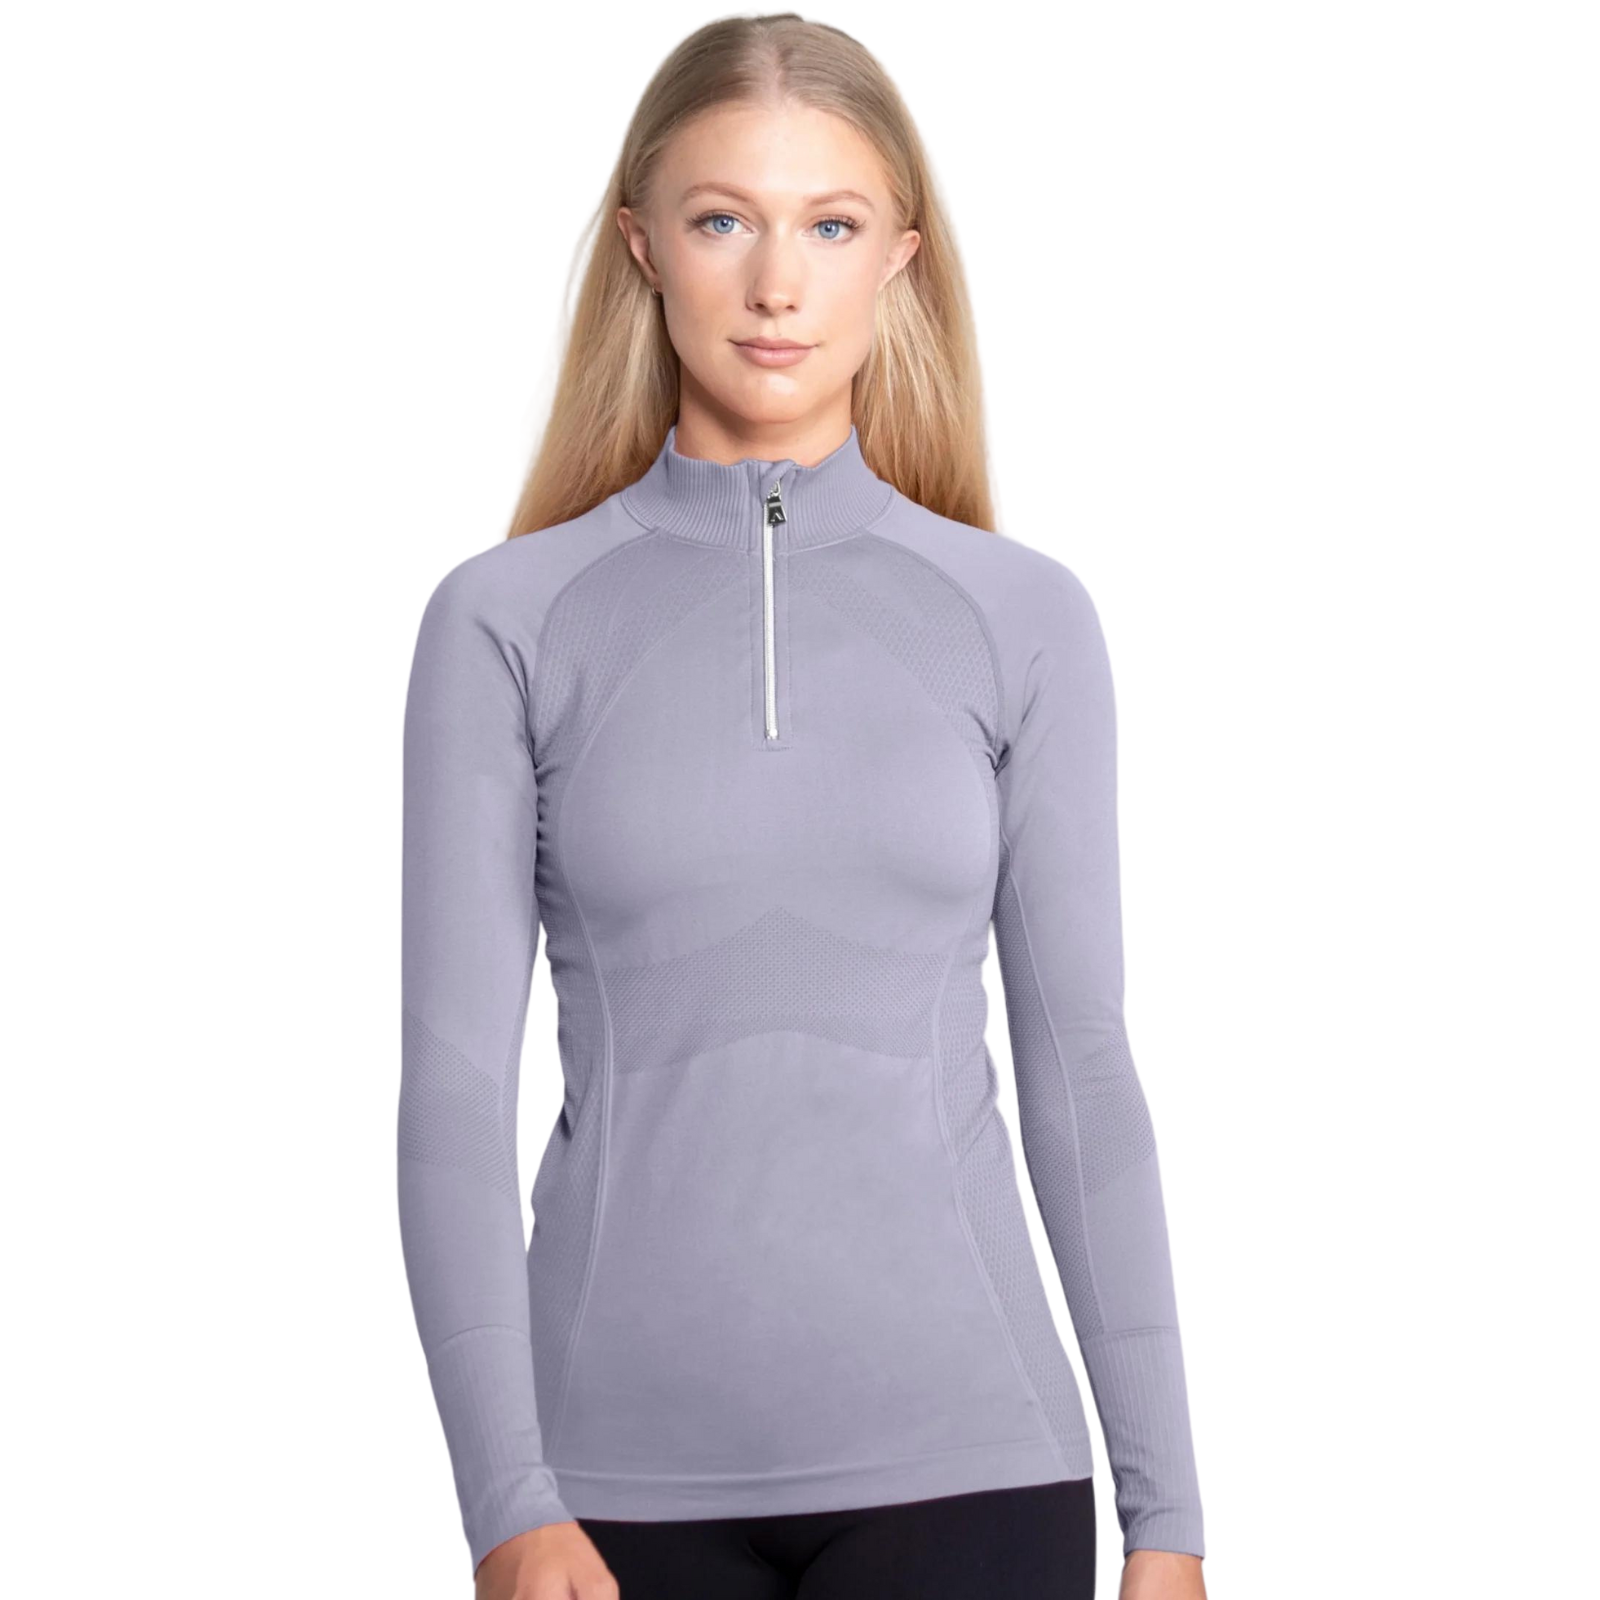 Anique Signature Sunshirt in Lilac - Women&#39;s Small (4-6)